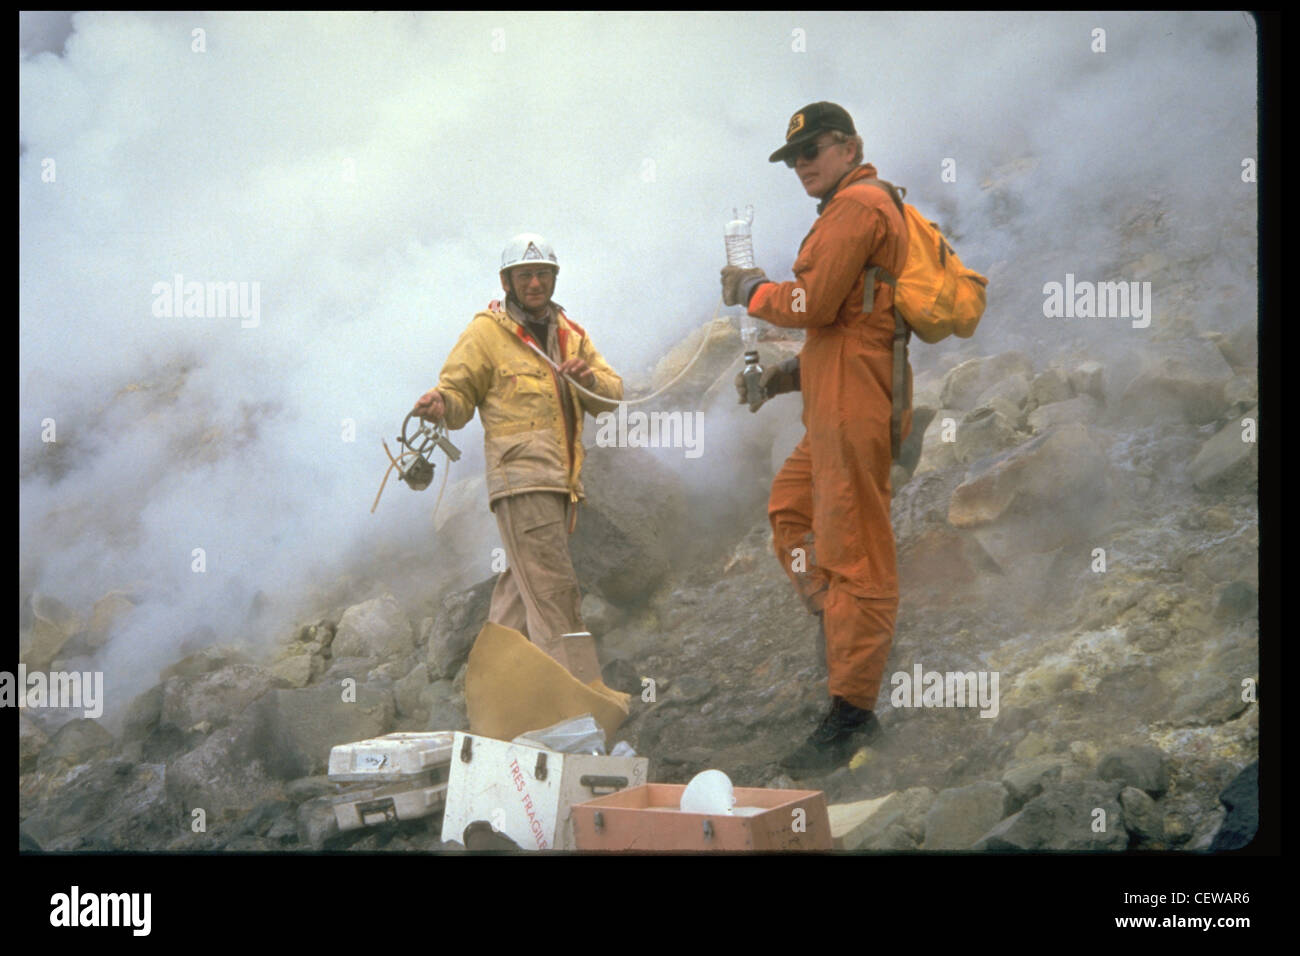 USGS geologists collect gas samples around the dome. Samples were gathered from vents on the dome and crater floor, and were used to monitor changes in chemical composition. Additionally, sulfur dioxide gas was measured from a specially-equipped airplane before, during, and after eruptions to determine 'emission rates' for the volcano. During eruptions, emission rates typically increased to 5 to 10 times their pre-eruptive value. Stock Photo